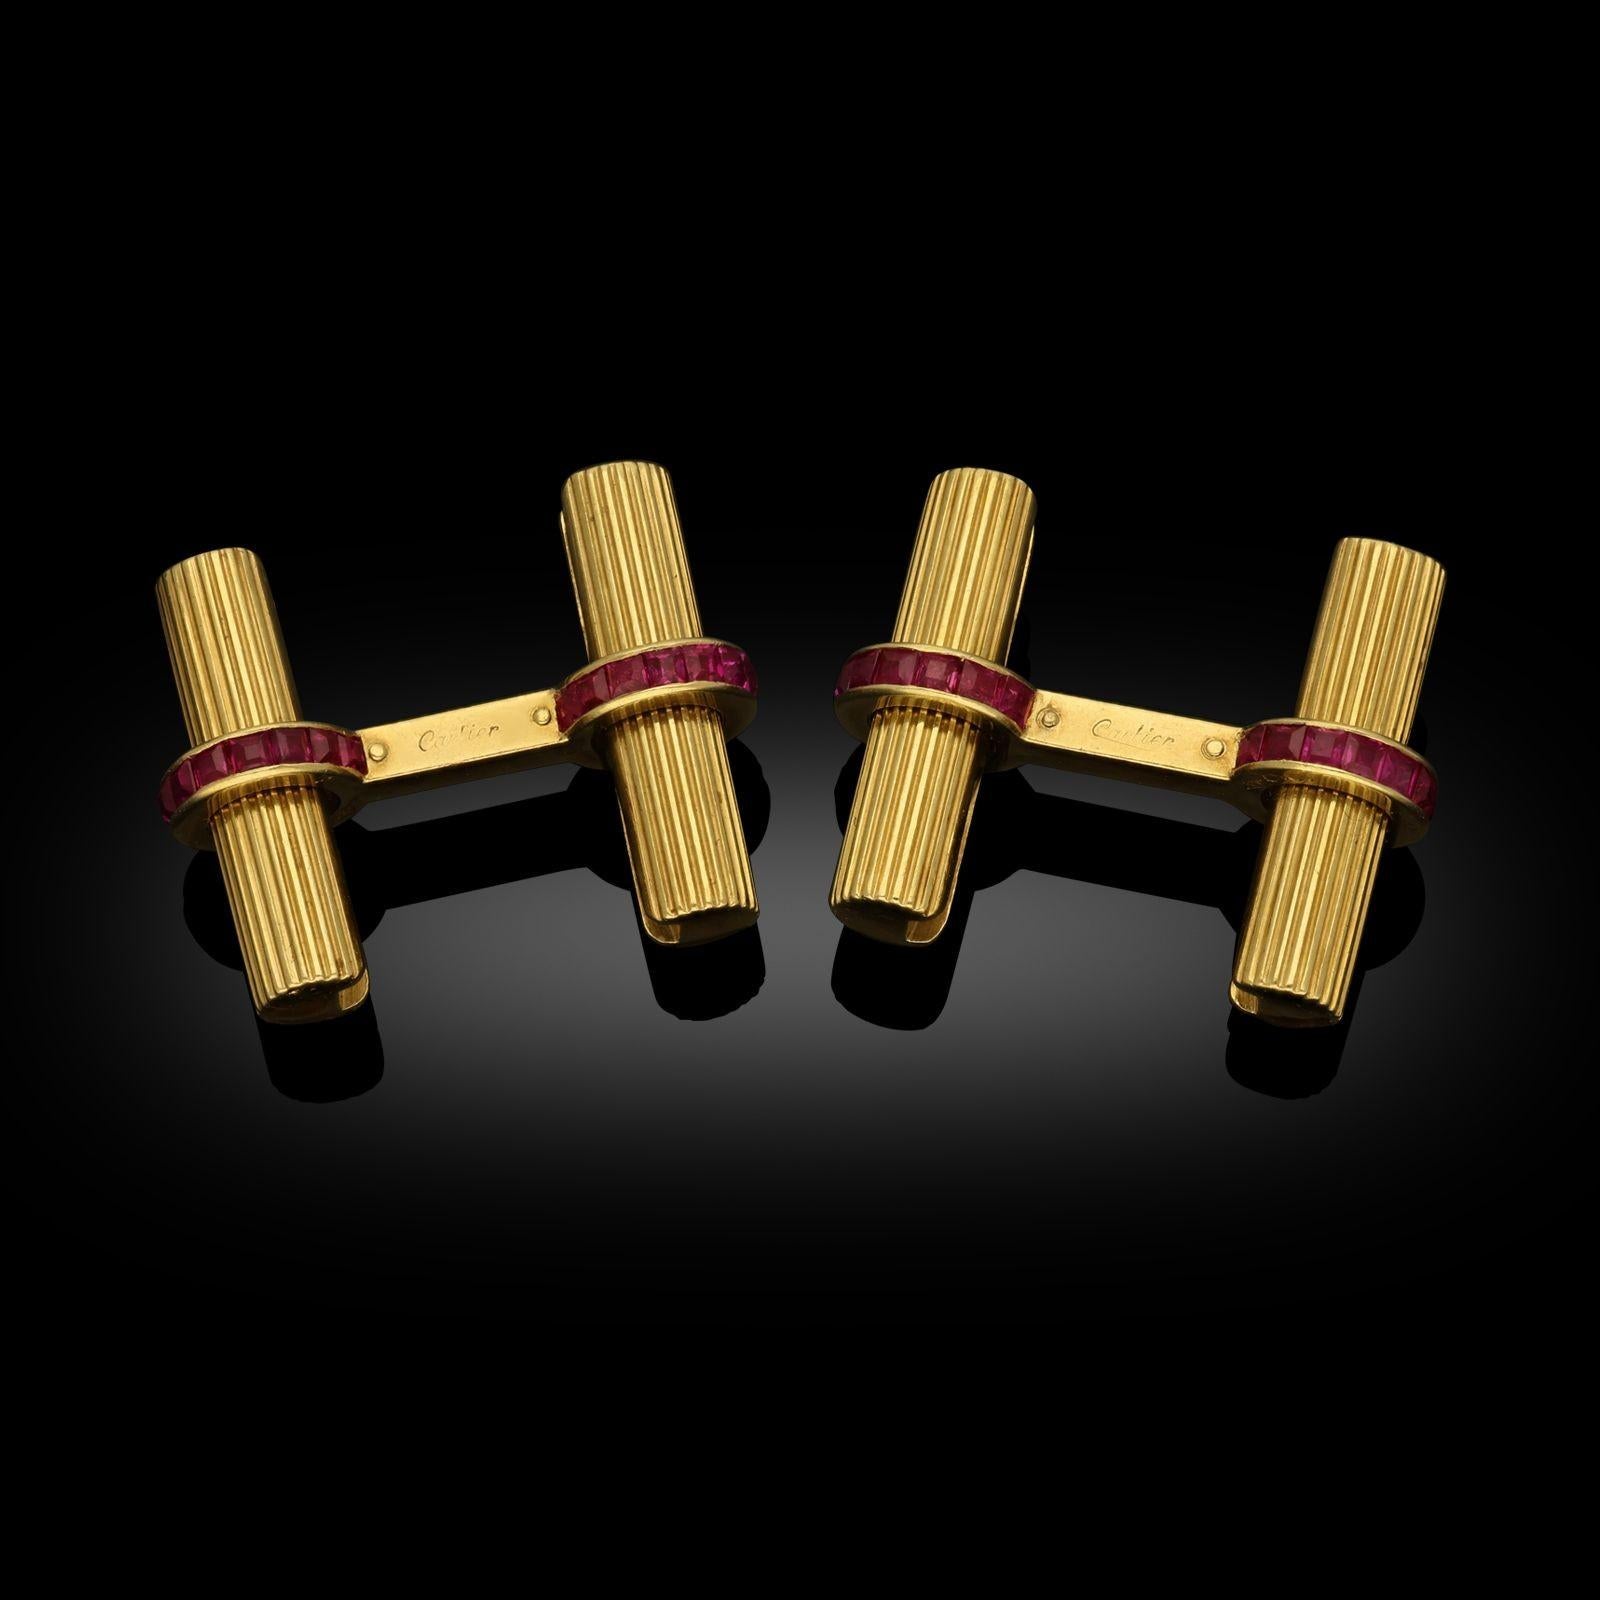 A pair of 18ct yellow gold double sided baton cufflinks by Cartier c.1960. The batons are fluted cylindrical bars in 18ct yellow gold, the connecting bars set with channel-set calibrated rubies. One baton on each is detachable by the twist and pull